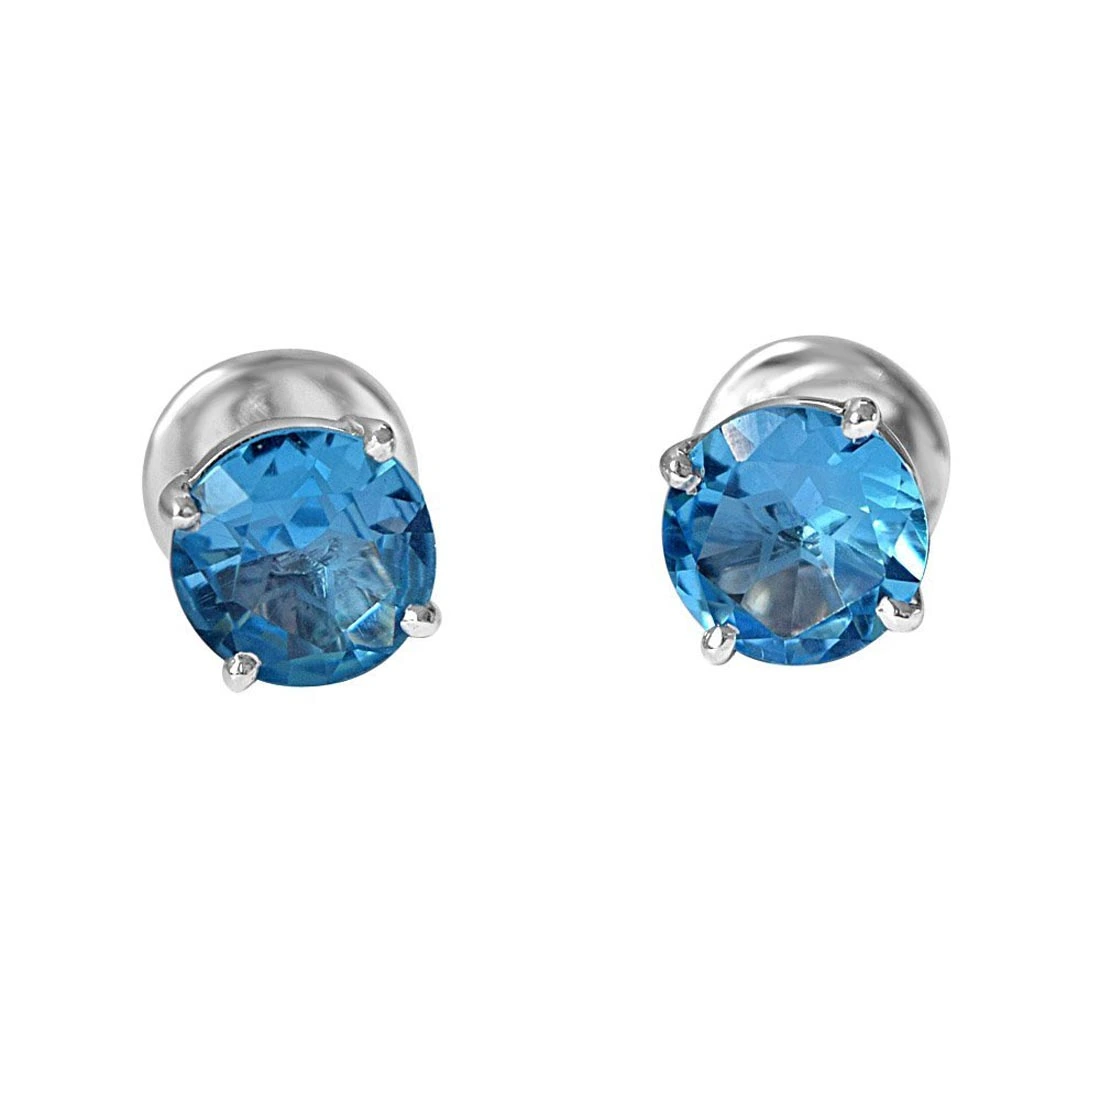 5.00 cts Round Shaped Blue Topaz Gemstone Solitaire Earrings in 925 Sterling Silver (SDE15)